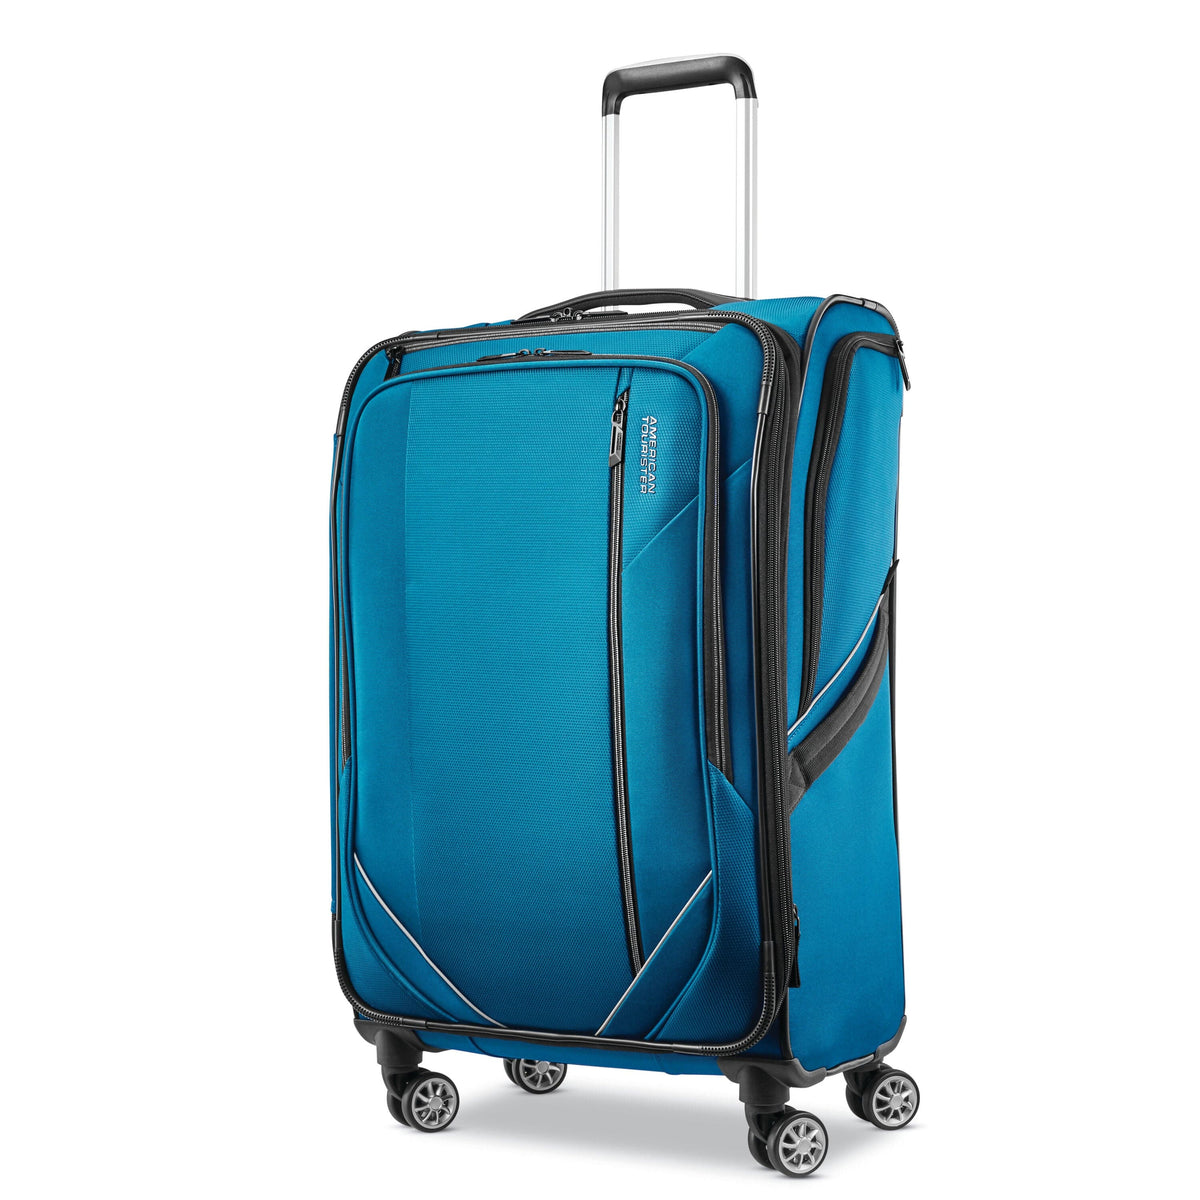 American Tourister Zoom Turbo 24" Spinner Luggage